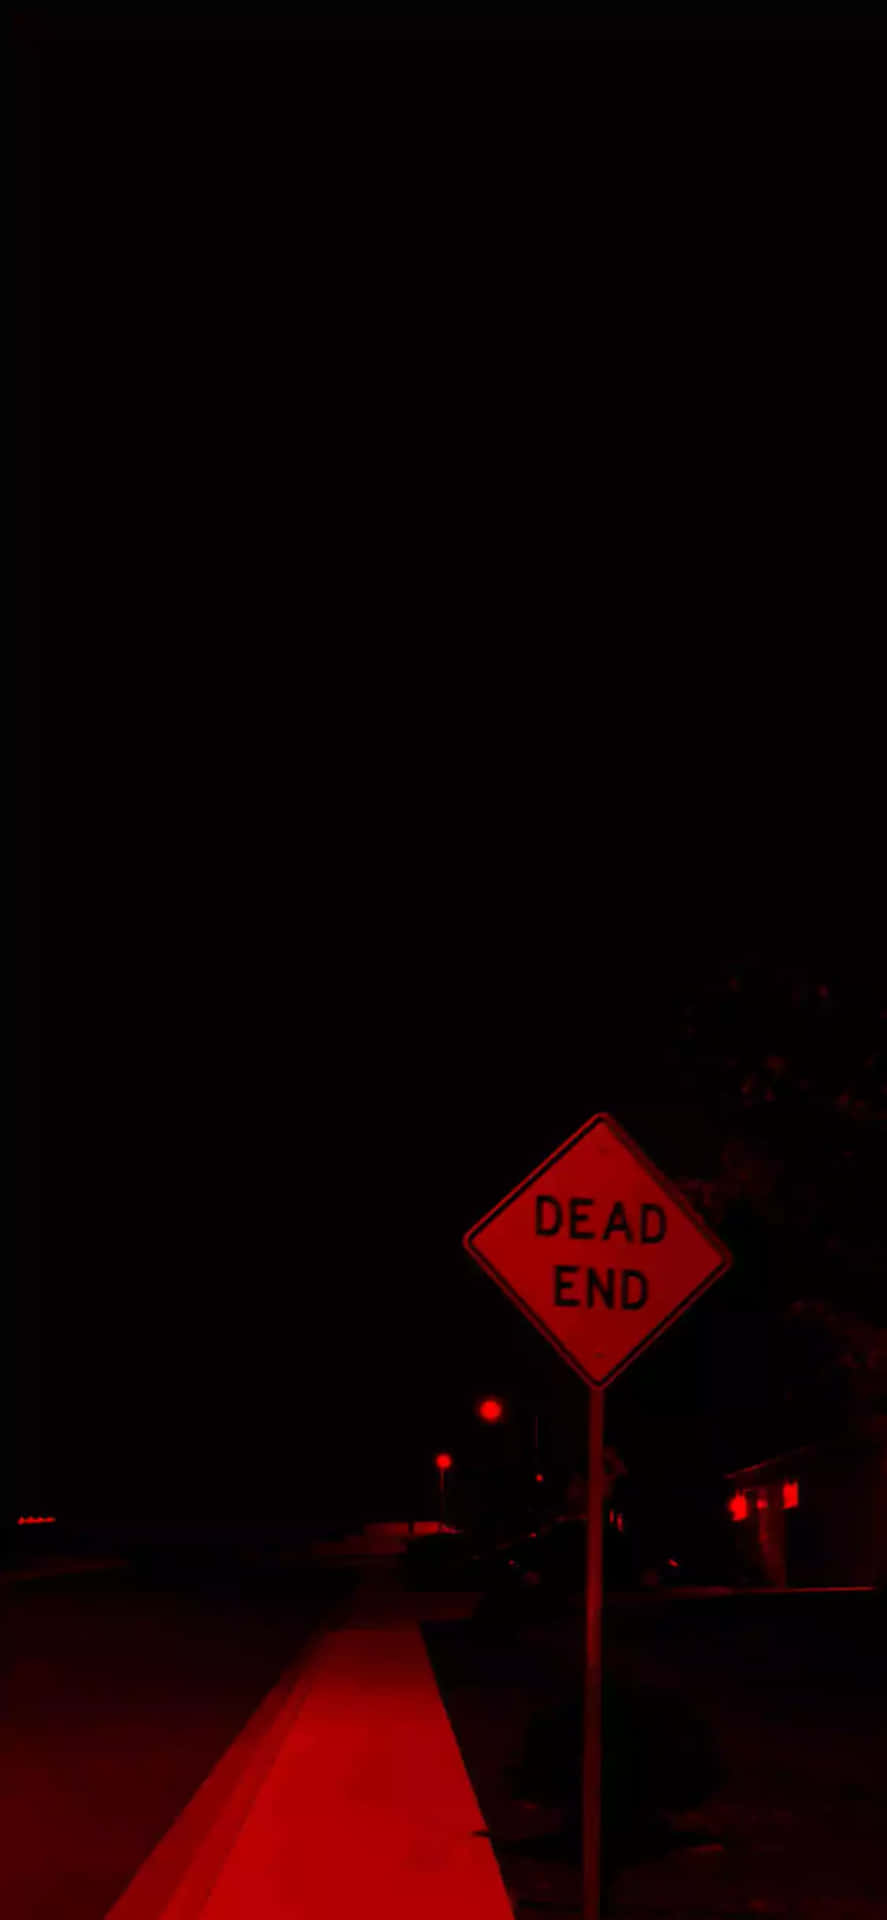 "The end is just the beginning" Wallpaper